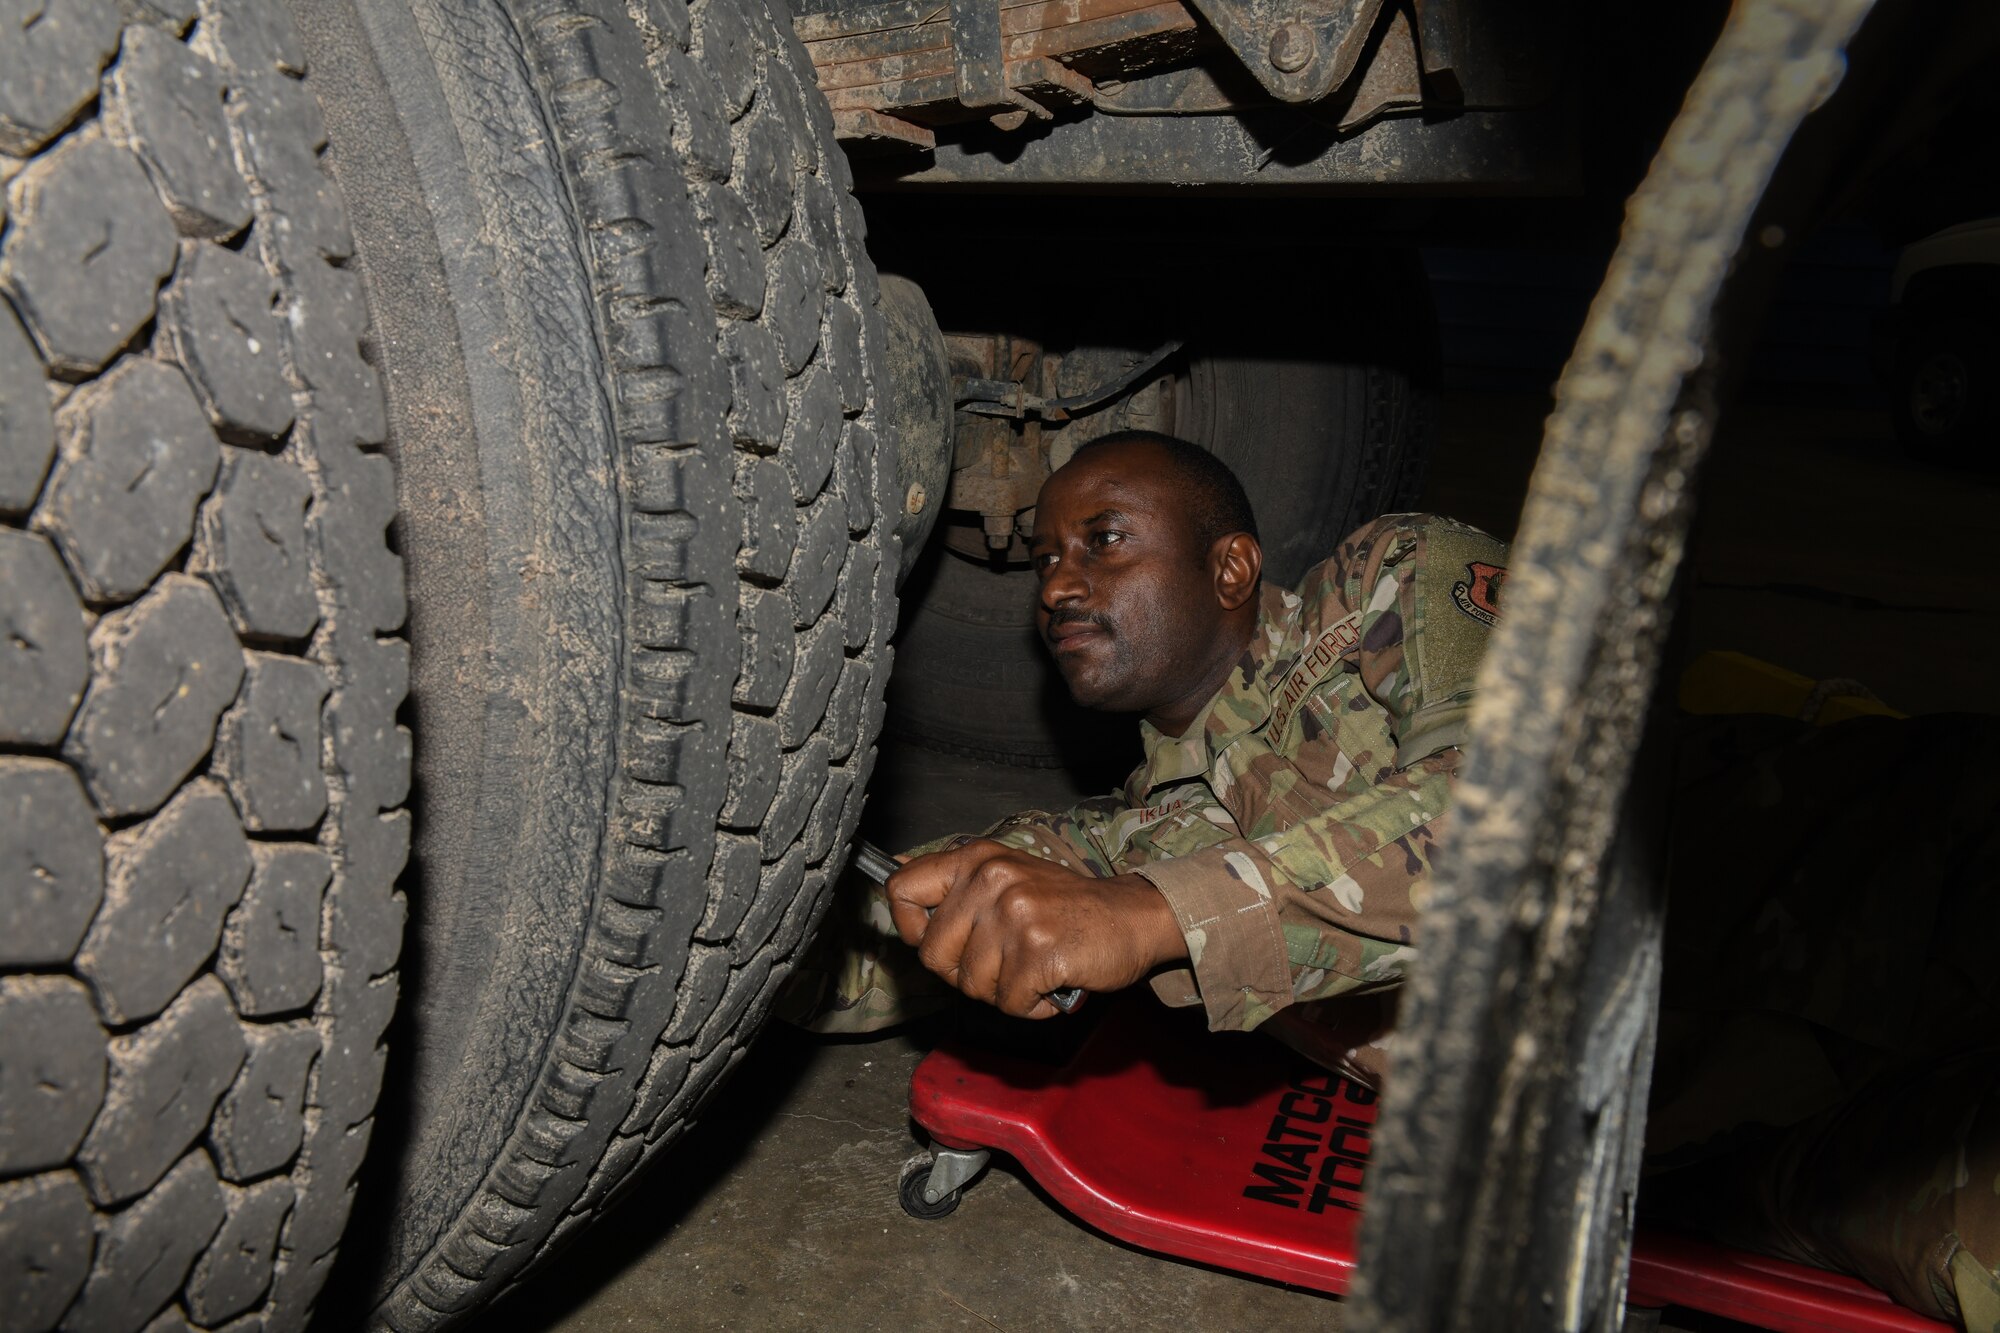 Ikua is one of four Airmen with the 910th LRS who immigrated to the United States from Kenya or Ghana.